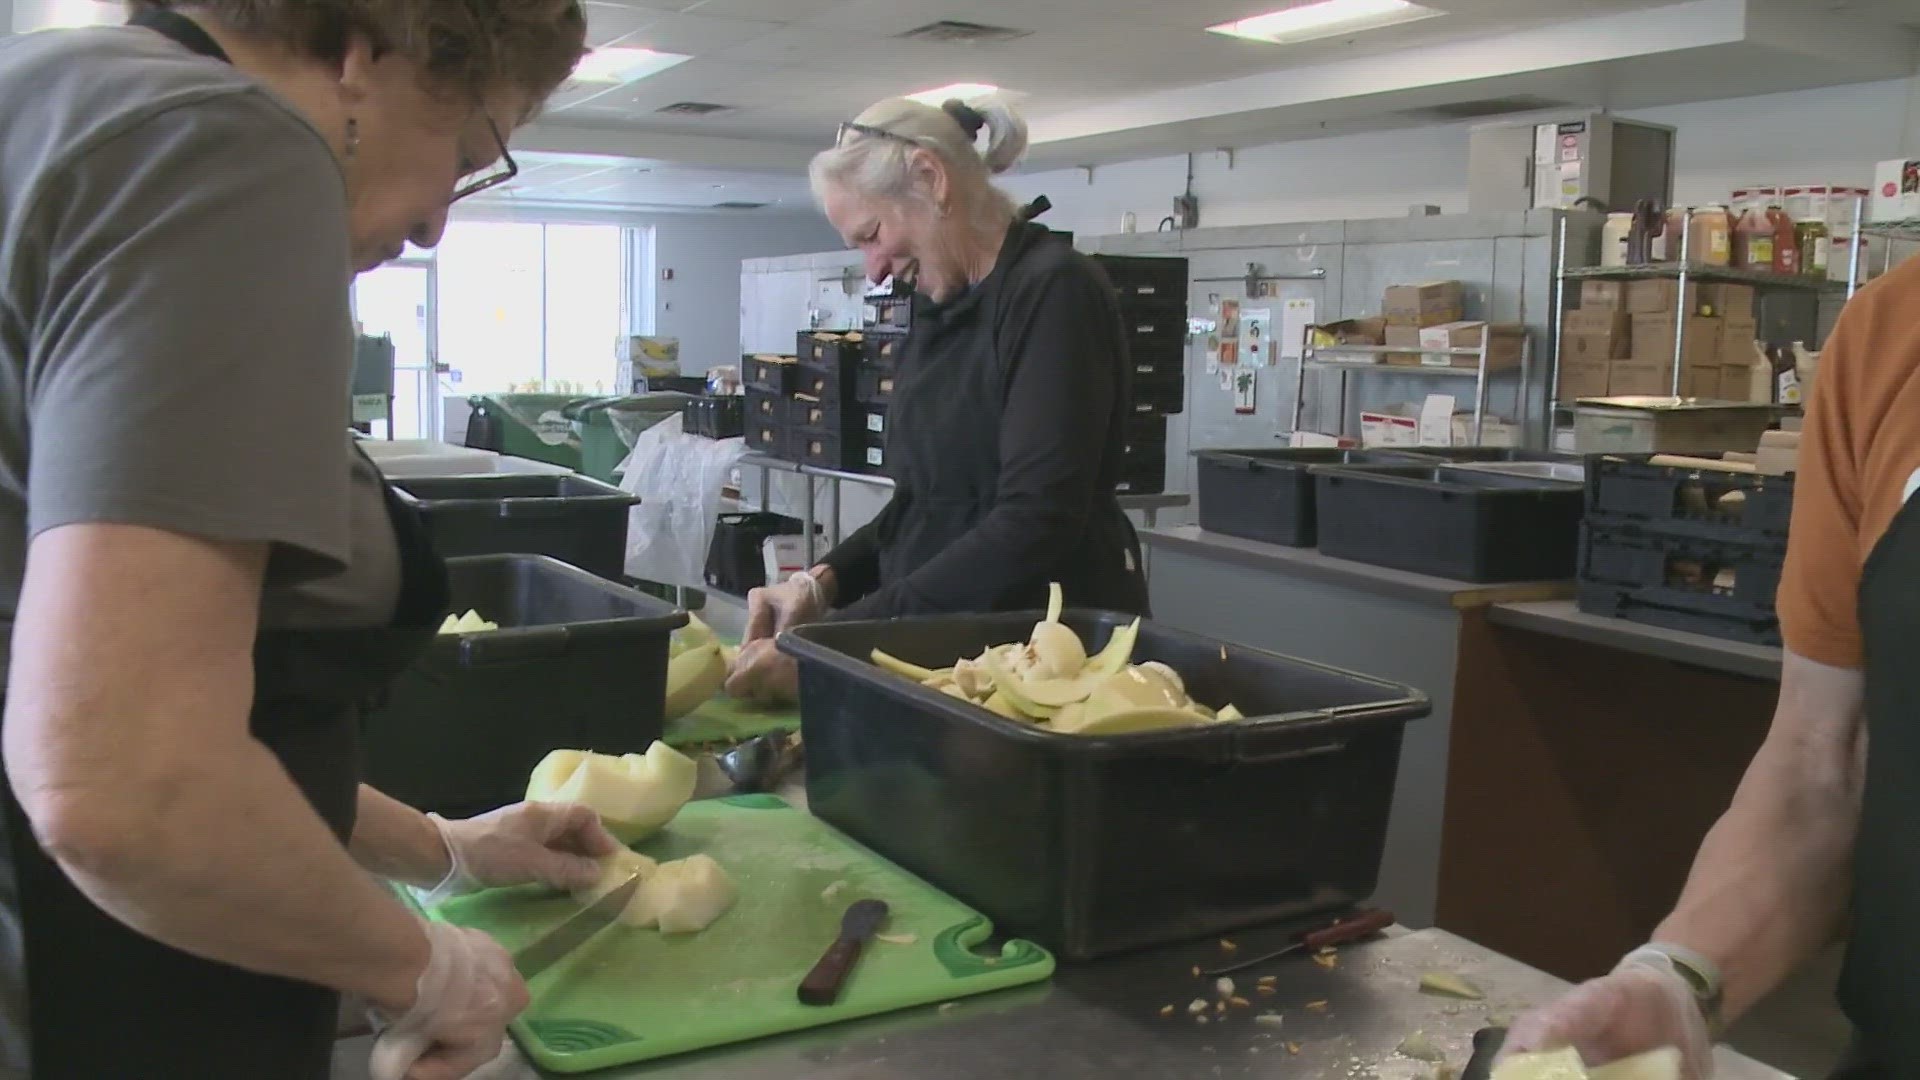 The Preble Street Food Security Hub in South Portland is one of the Good Shepherd Food Bank's hundreds of partners across Maine.